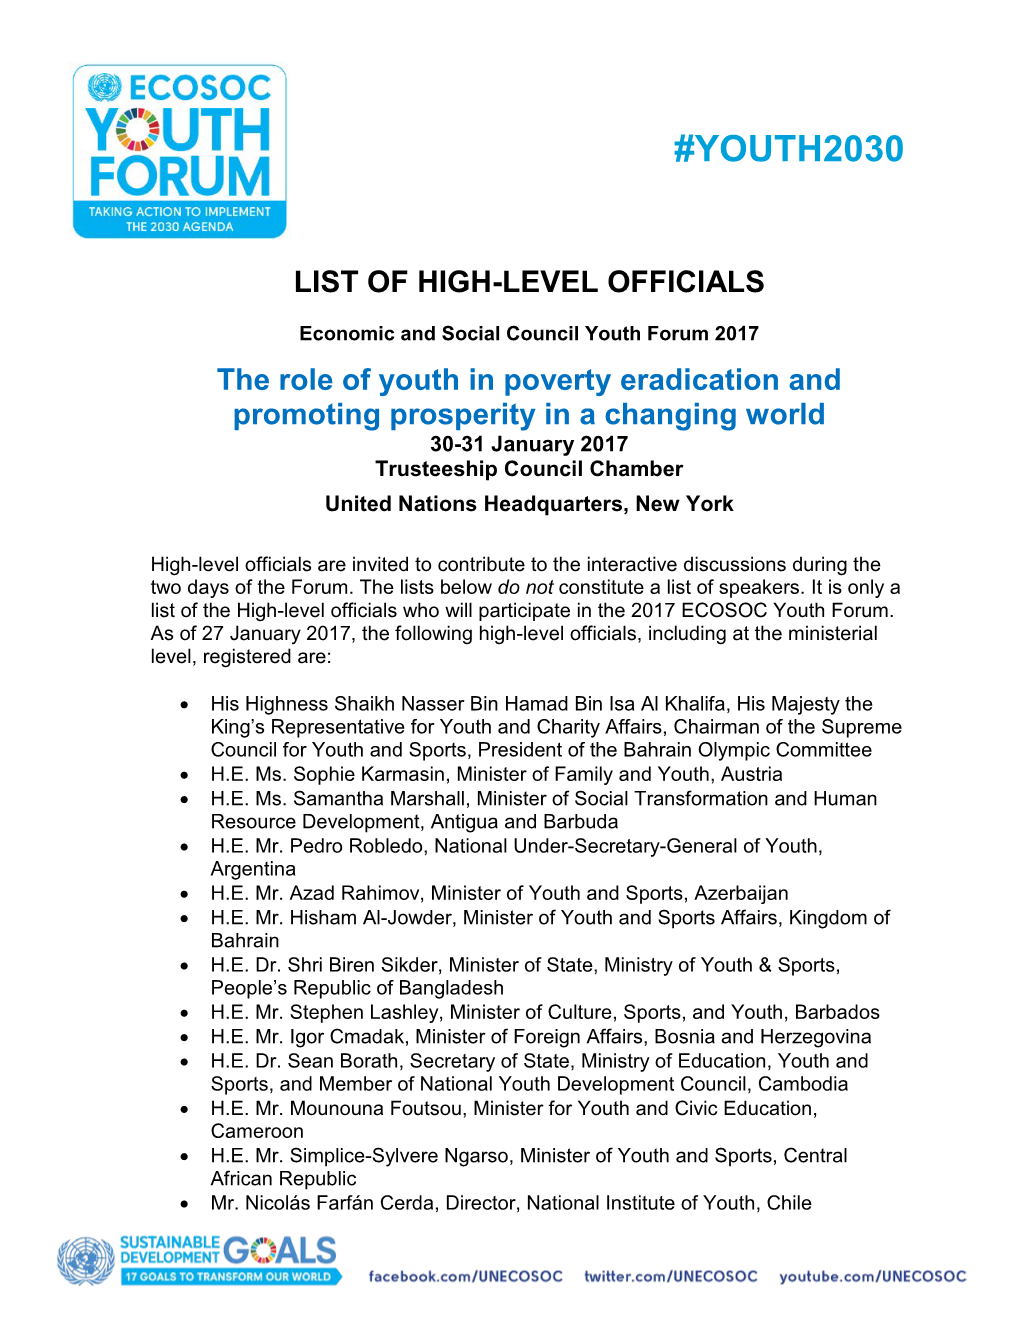 List of the High-Level Officials Who Will Participate in the 2017 ECOSOC Youth Forum